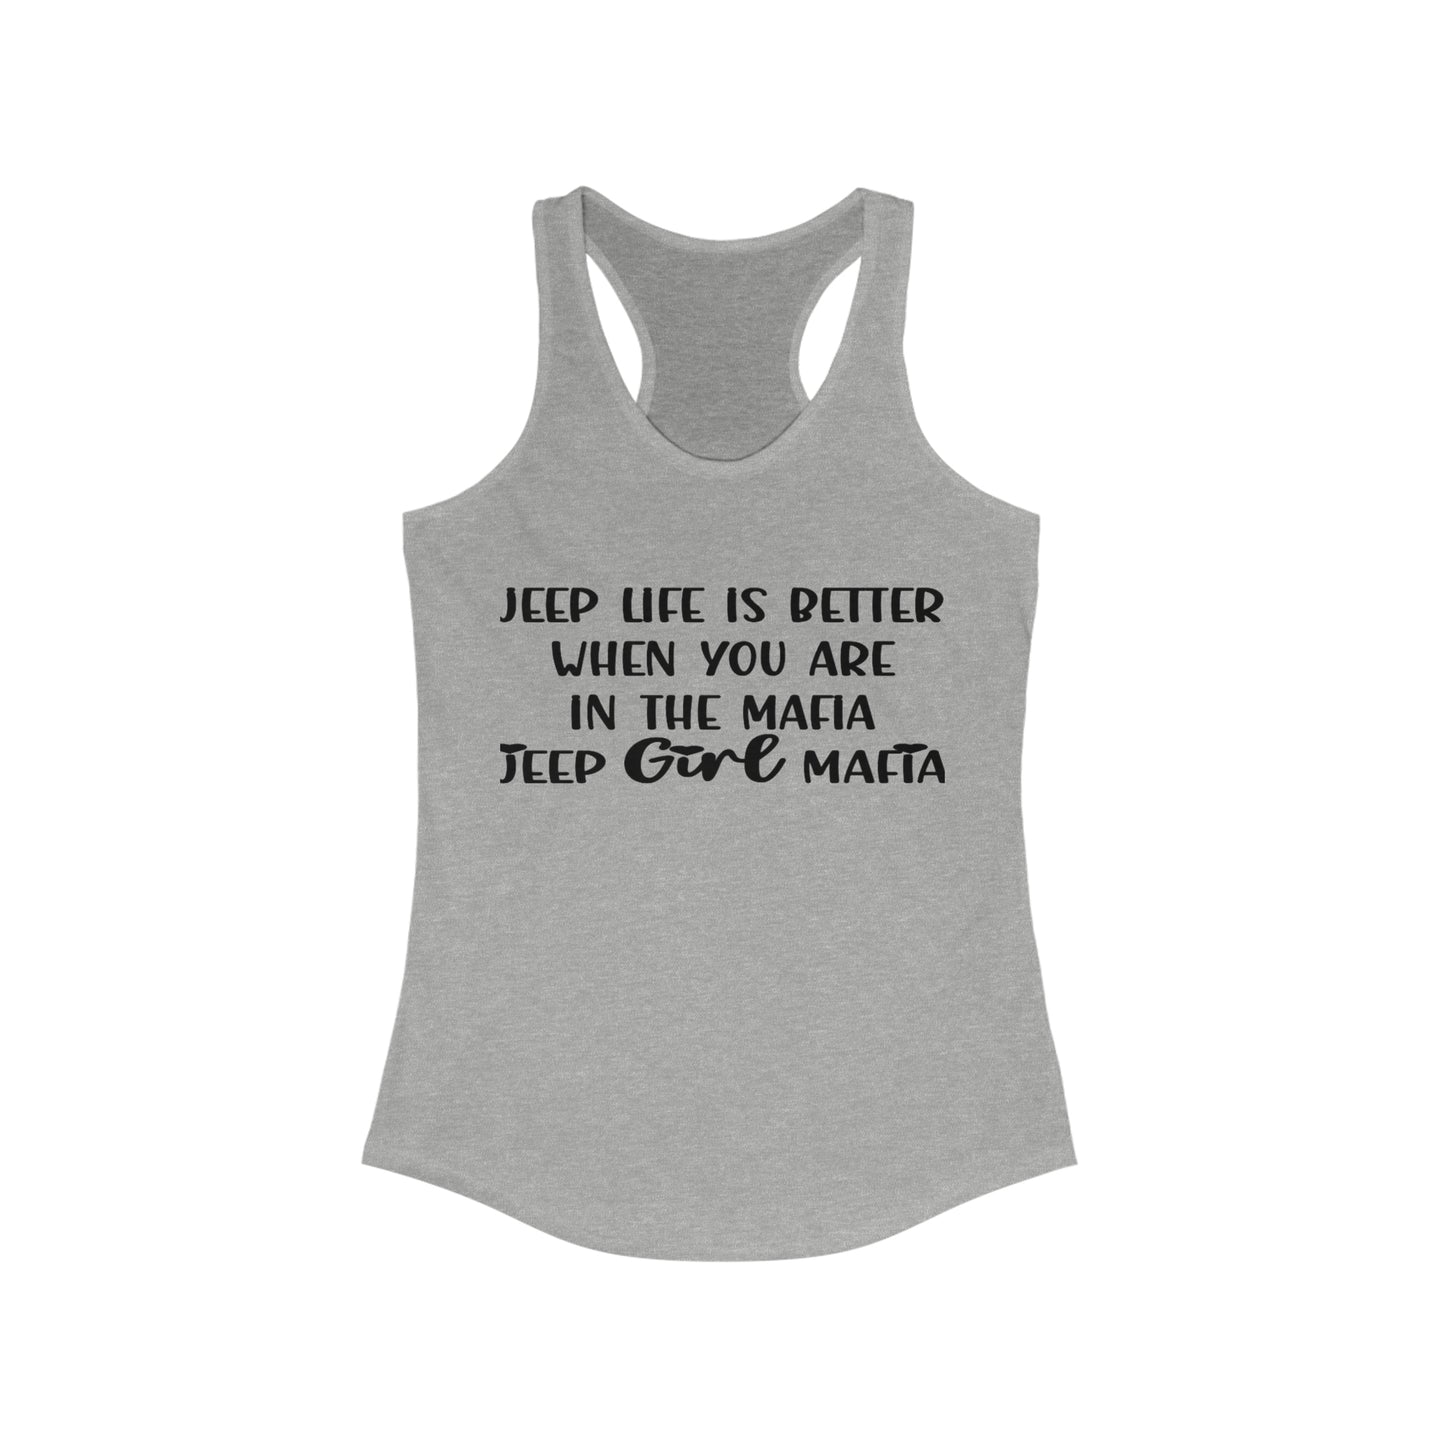 Jeep Life is Better When You Are in The Mafia | Racerback Tank Top